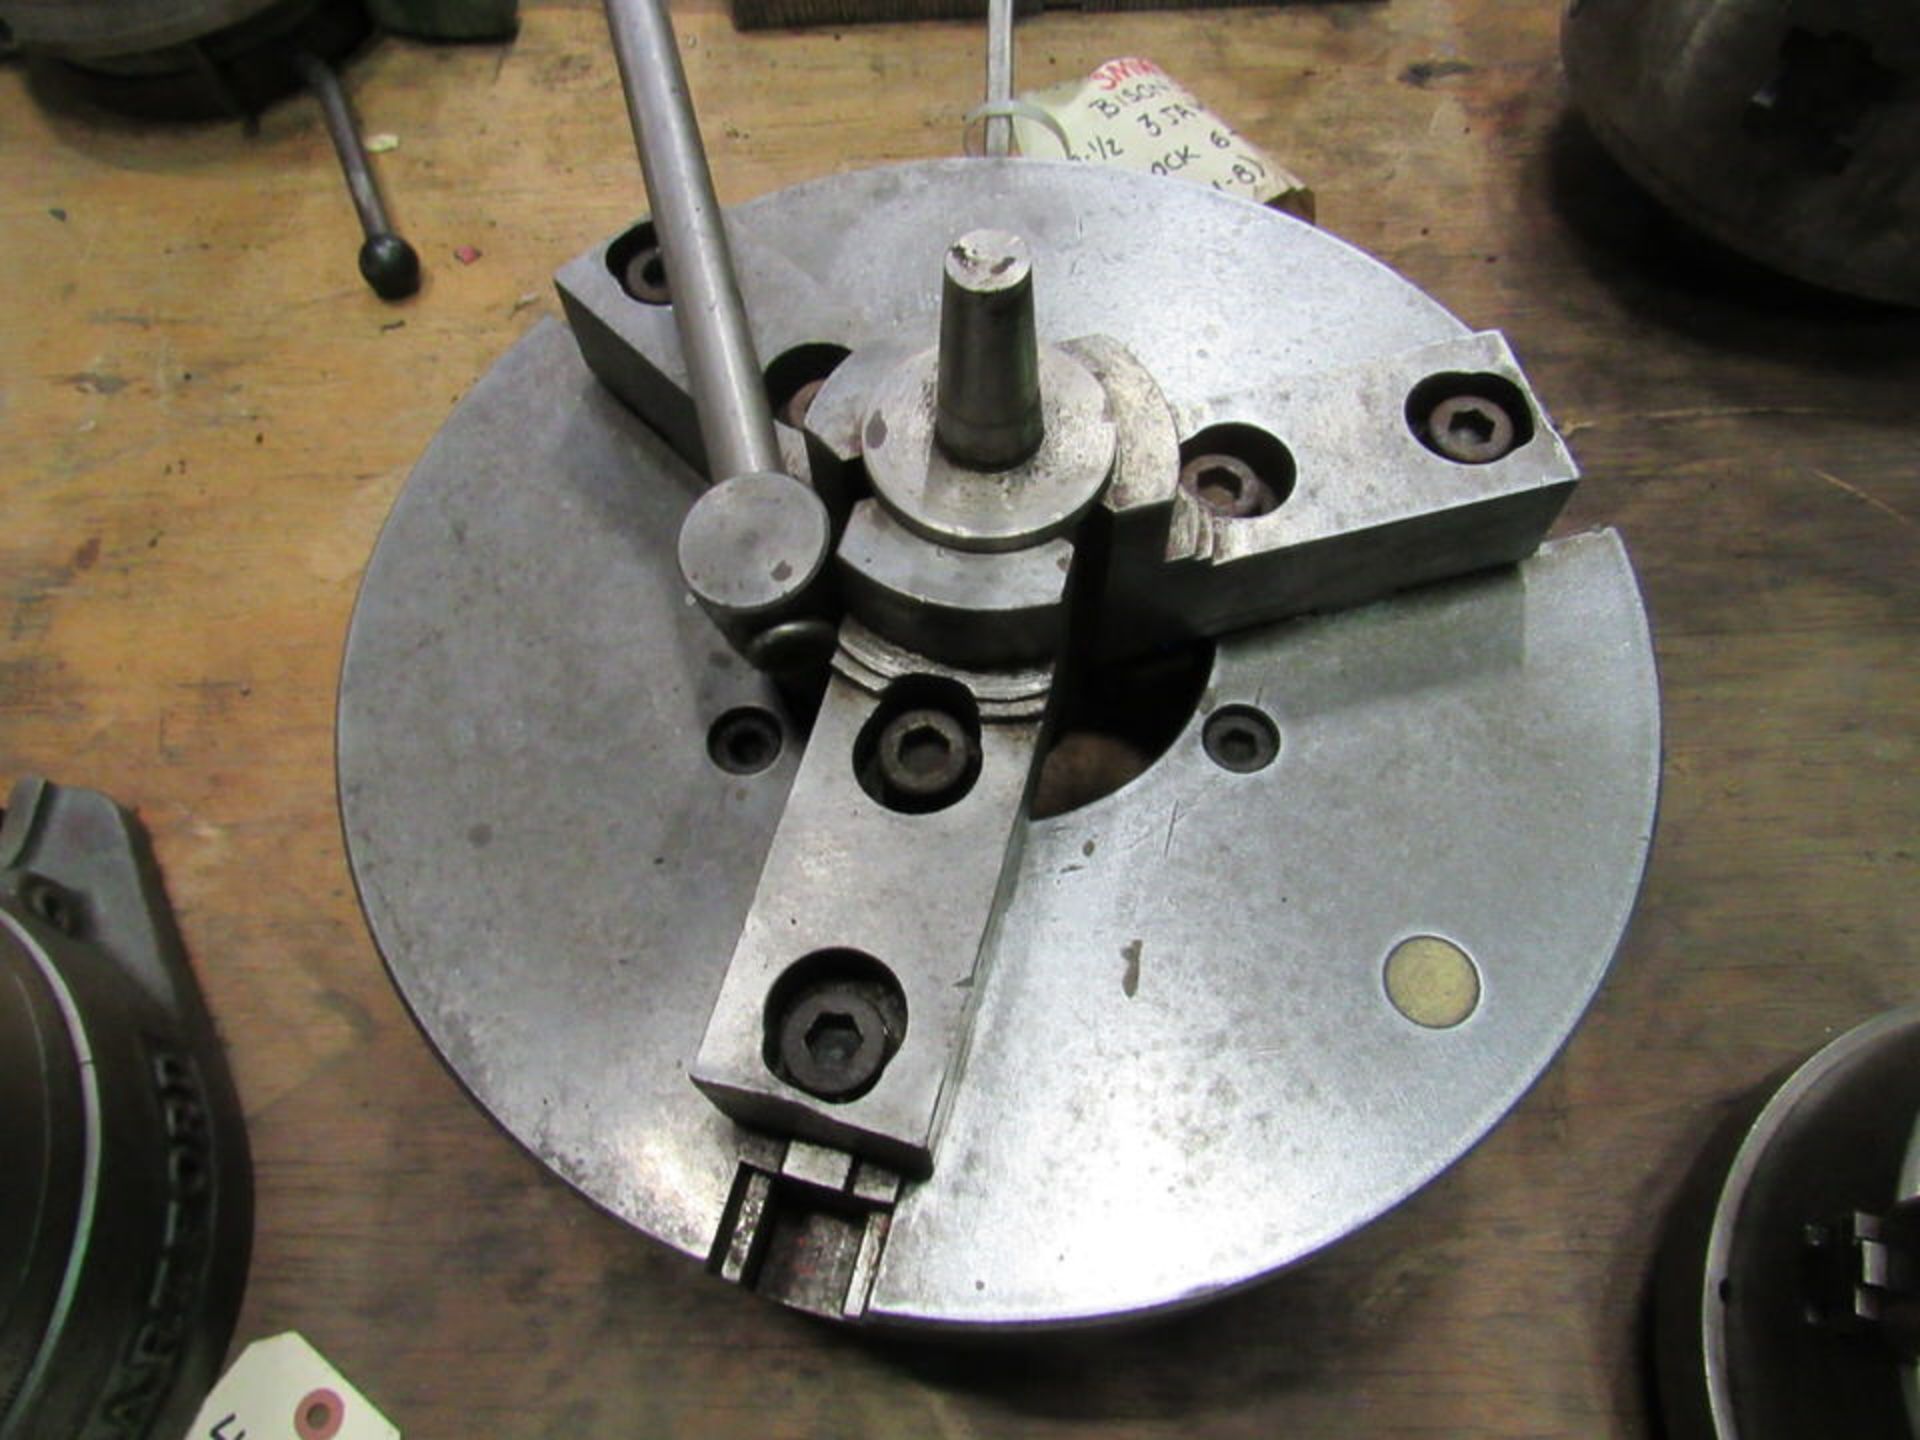 12.5" 3-Jaw Bison Chuck, 4" through hole, camlock 6 - 1" pin (D1-8), S/N NA (LOCATION: 3603 Melva